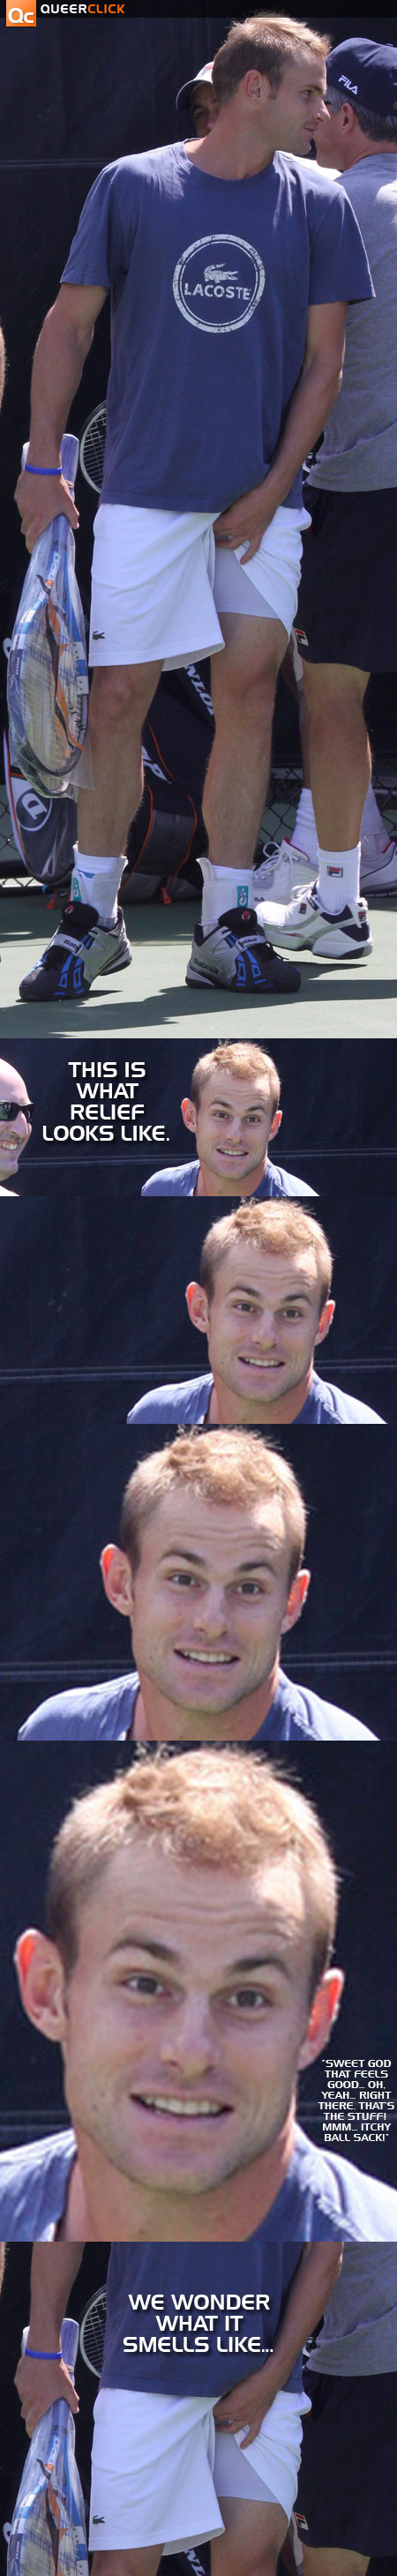 Andy Roddick Scratches Where We Itch